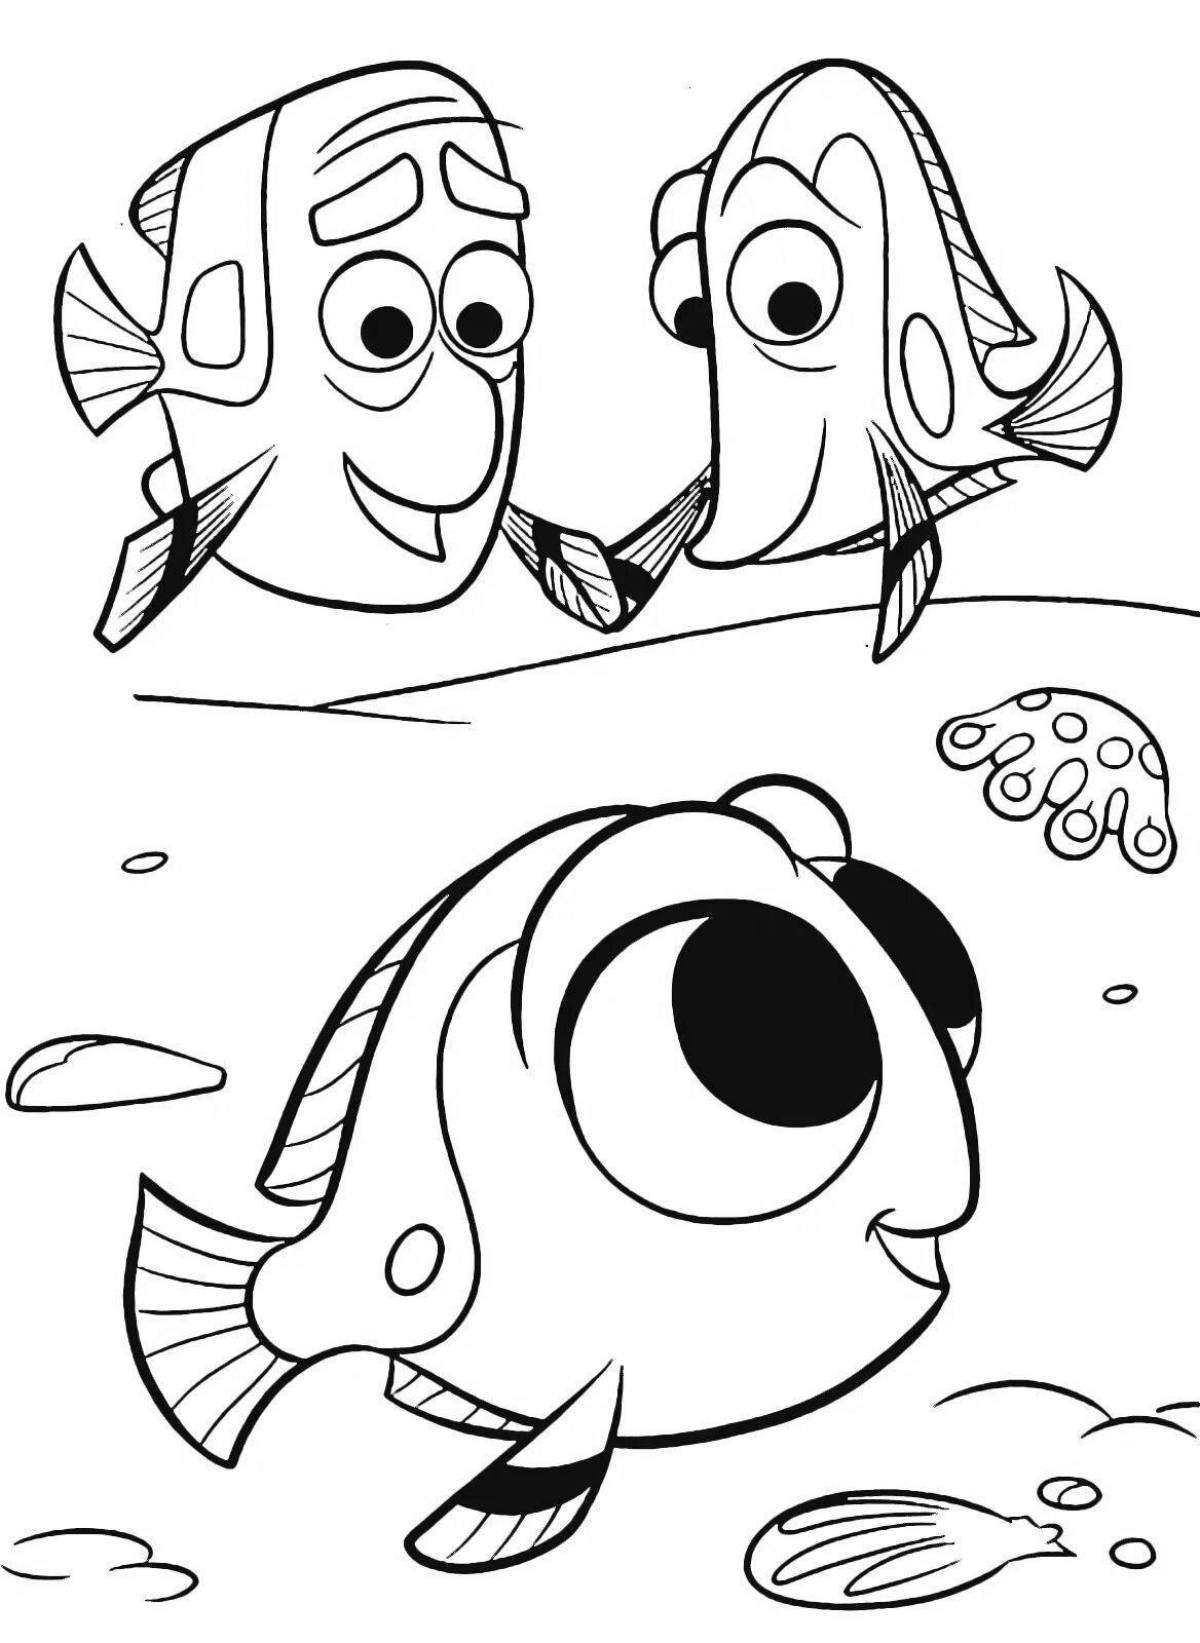 Nemo and dory live coloring